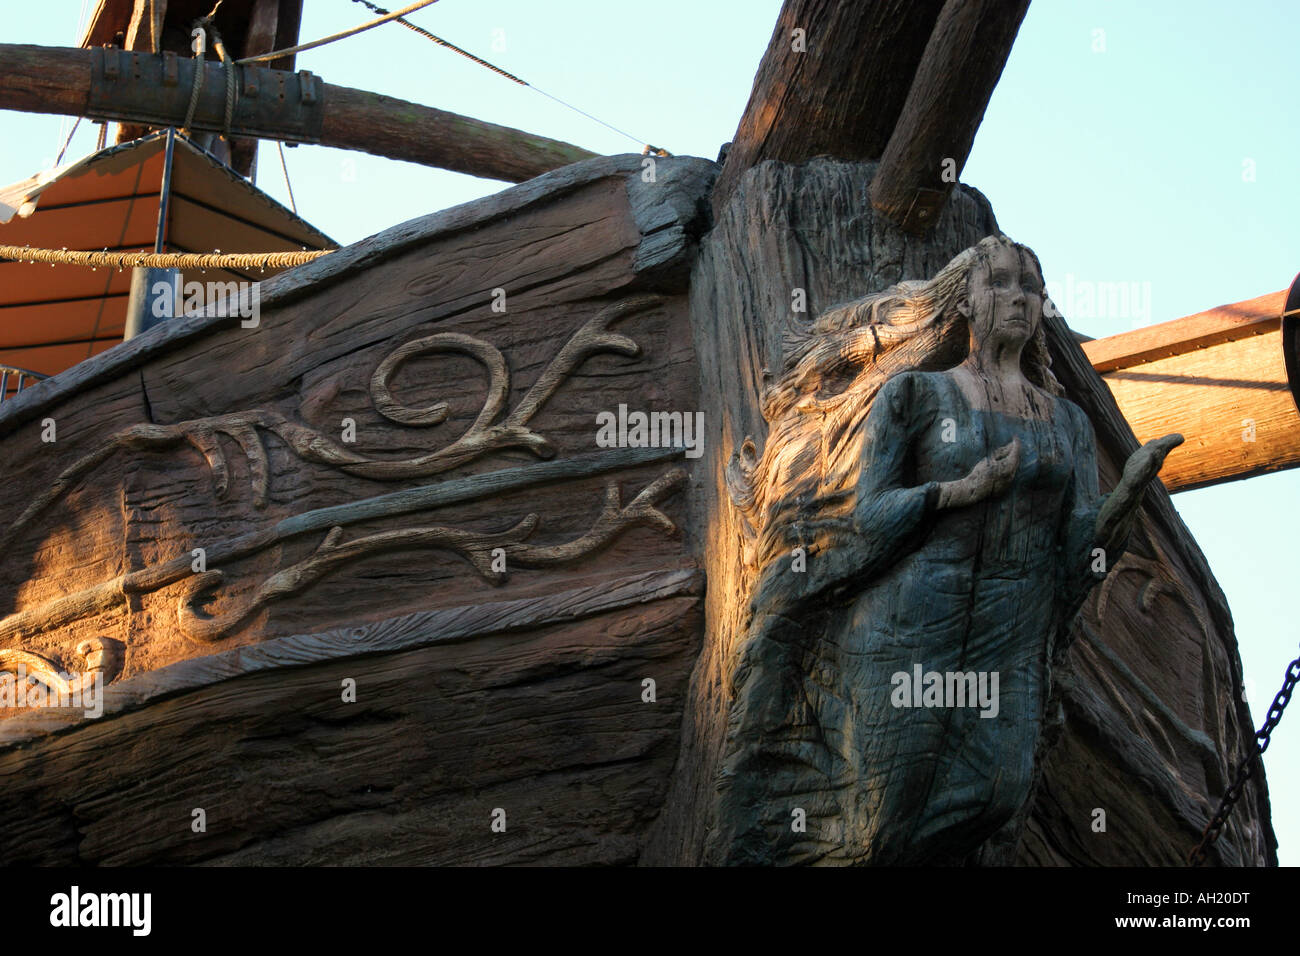 Pirate ship detail of the prow showing a woman statue Stock Photo